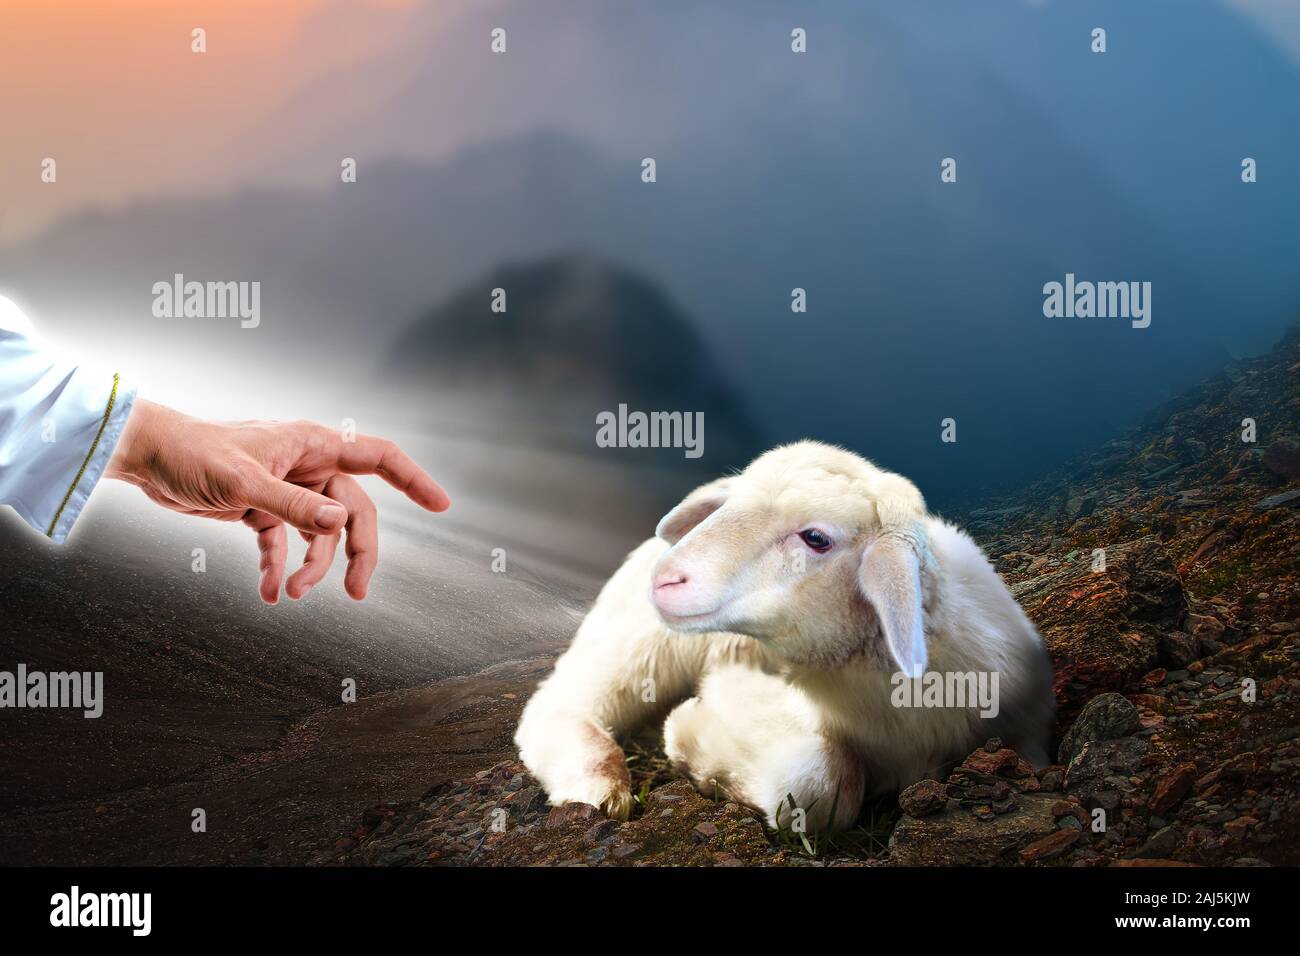 Jesus hand reaching out to a lost sheep. Biblical theme concept. Stock Photo